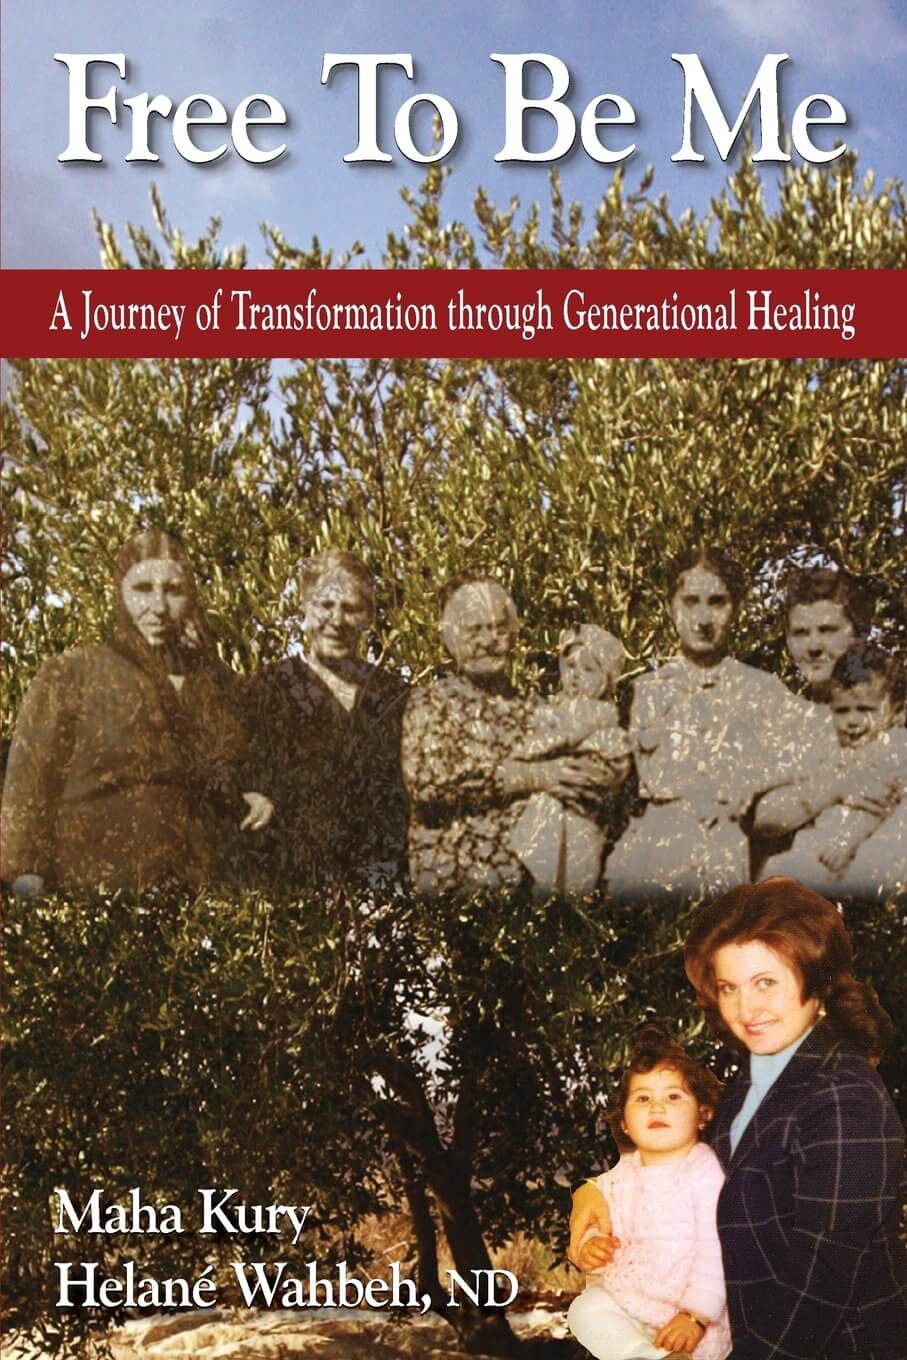 Free To Be Me: A Journey of Transformation through Generational Healing